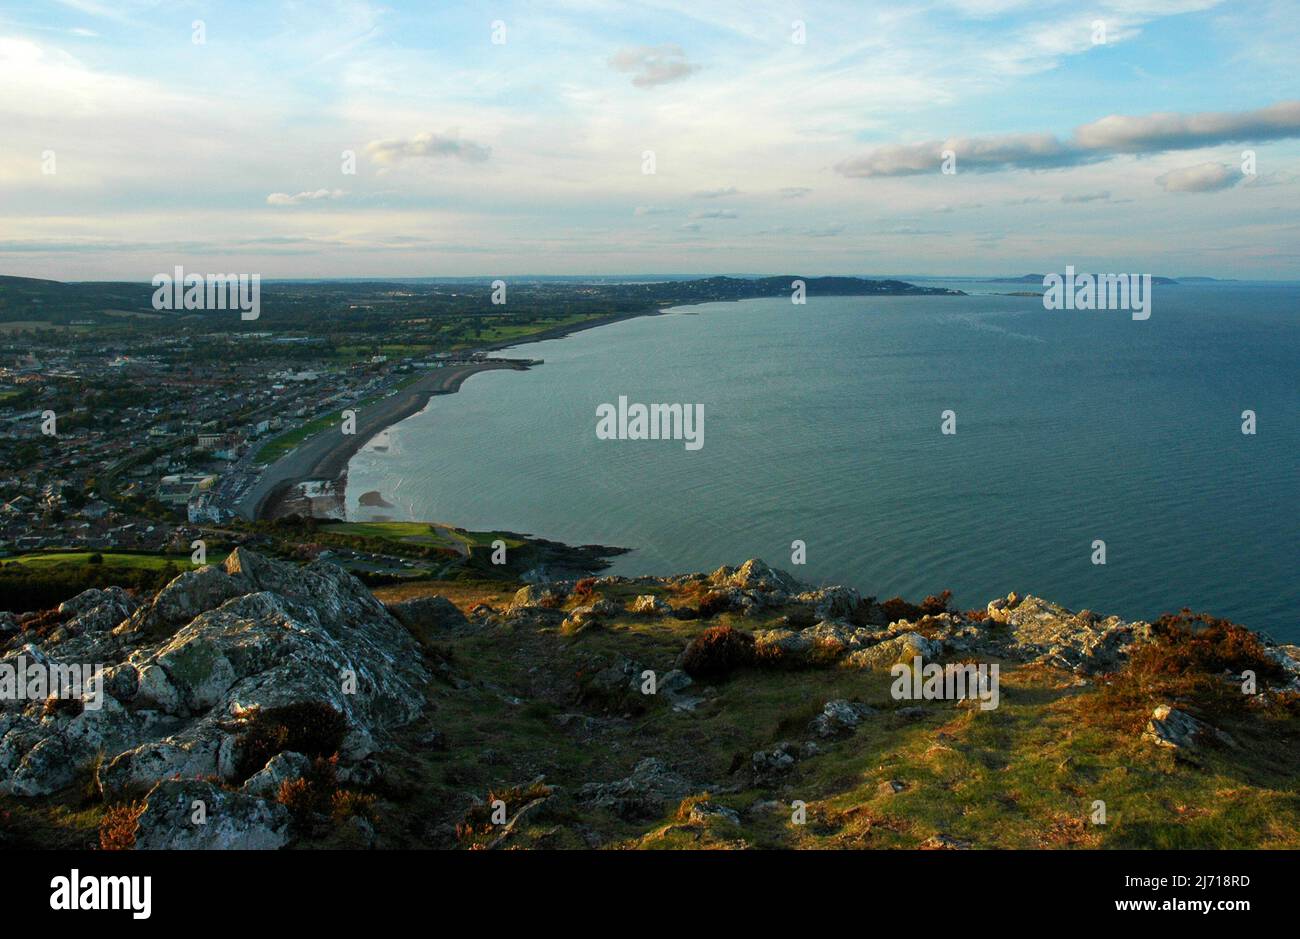 Evening view from the Bray Head hill, Bray County Wicklow Ireland. Stock Photo